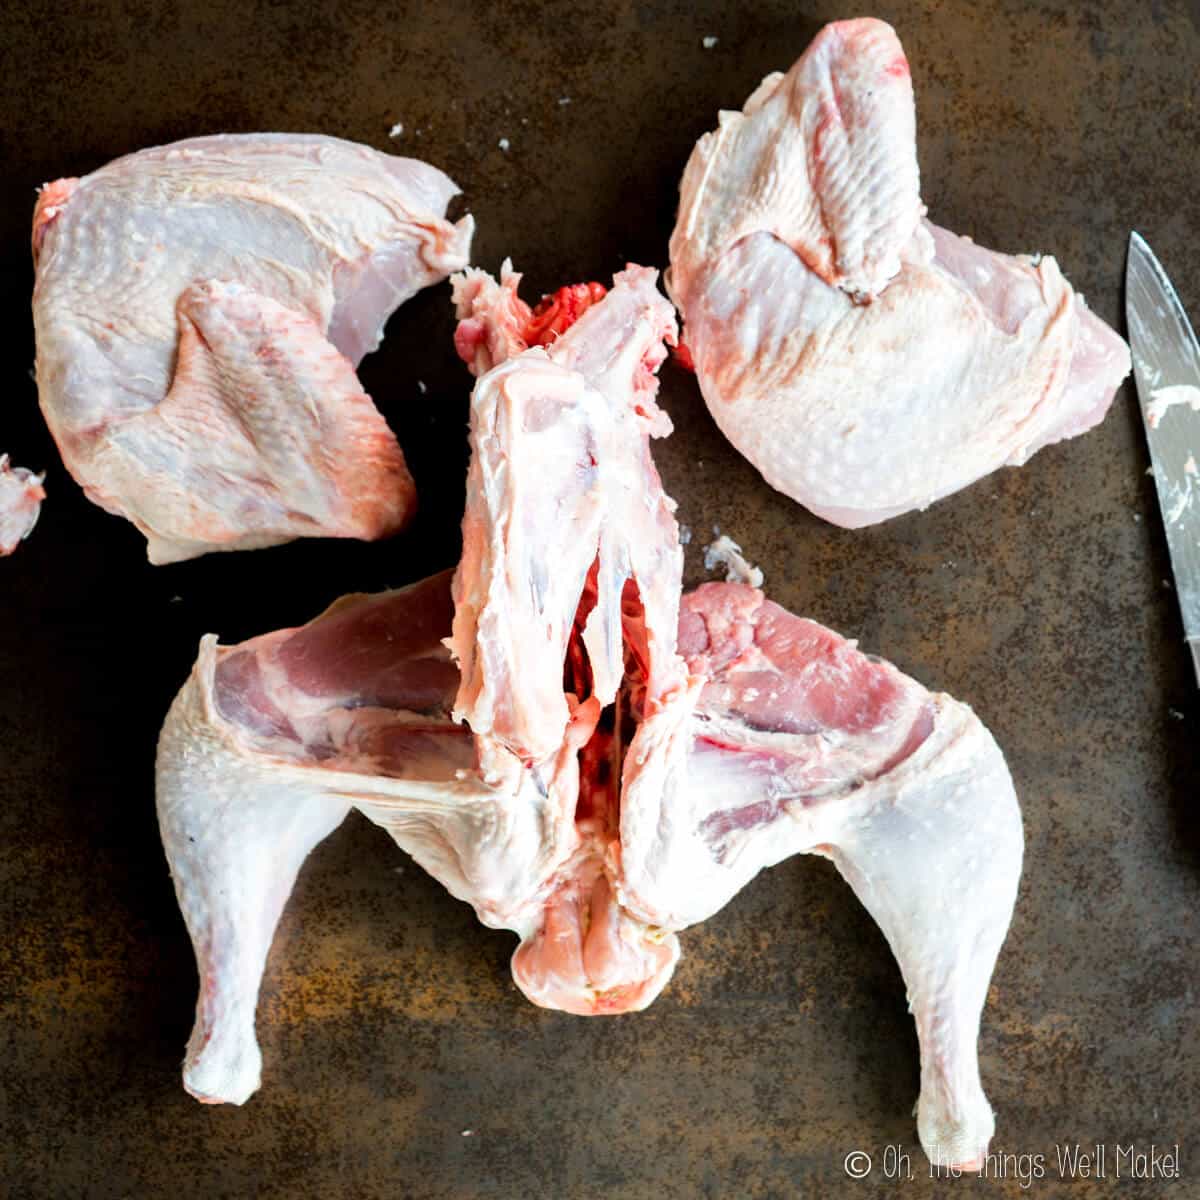 Turkey with both breasts removed